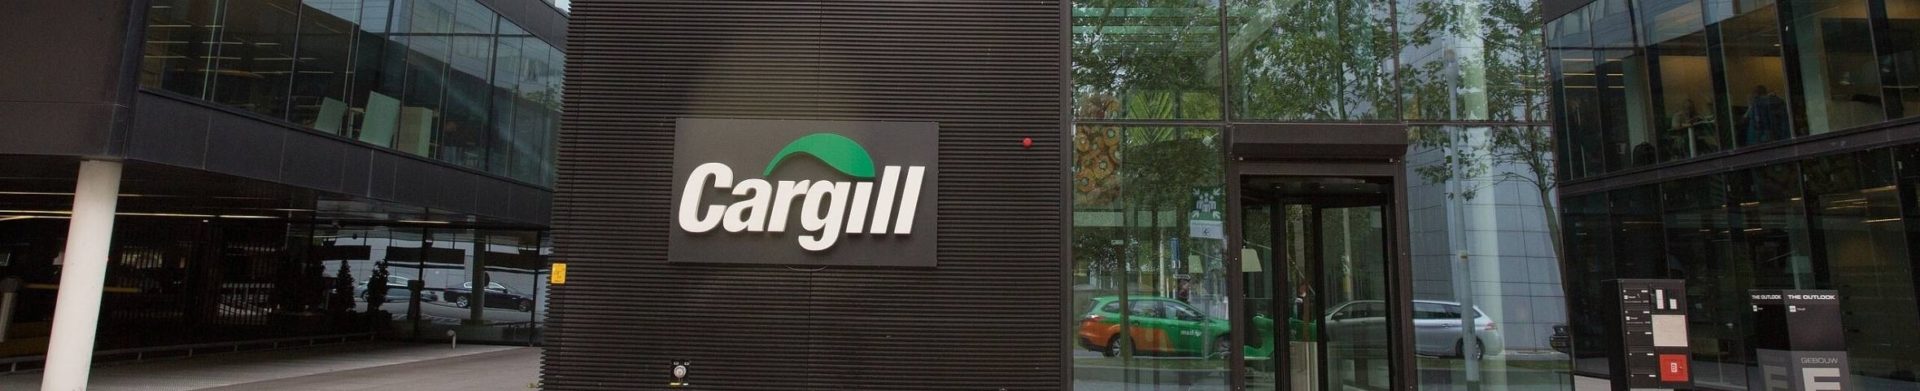 Cargill office in the daytime